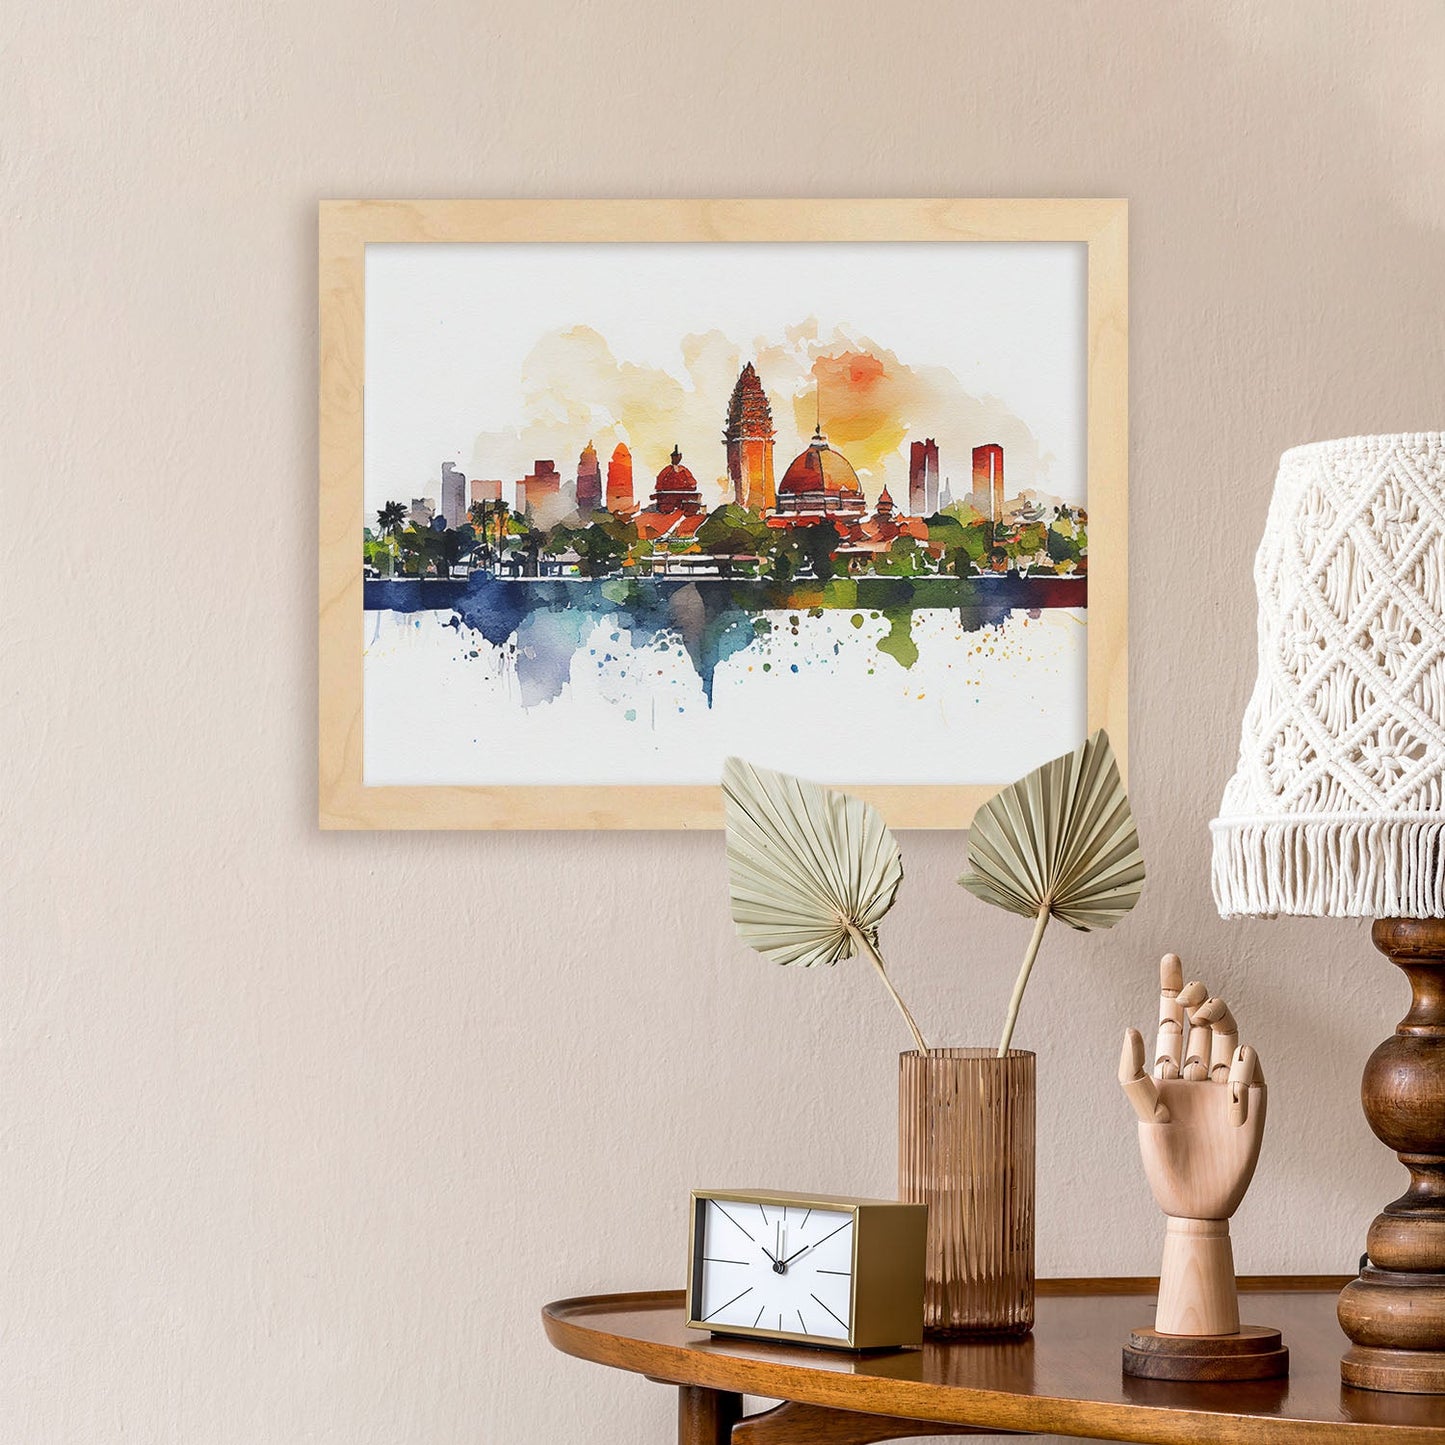 Nacnic watercolor of a skyline of the city of Bali_2. Aesthetic Wall Art Prints for Bedroom or Living Room Design.